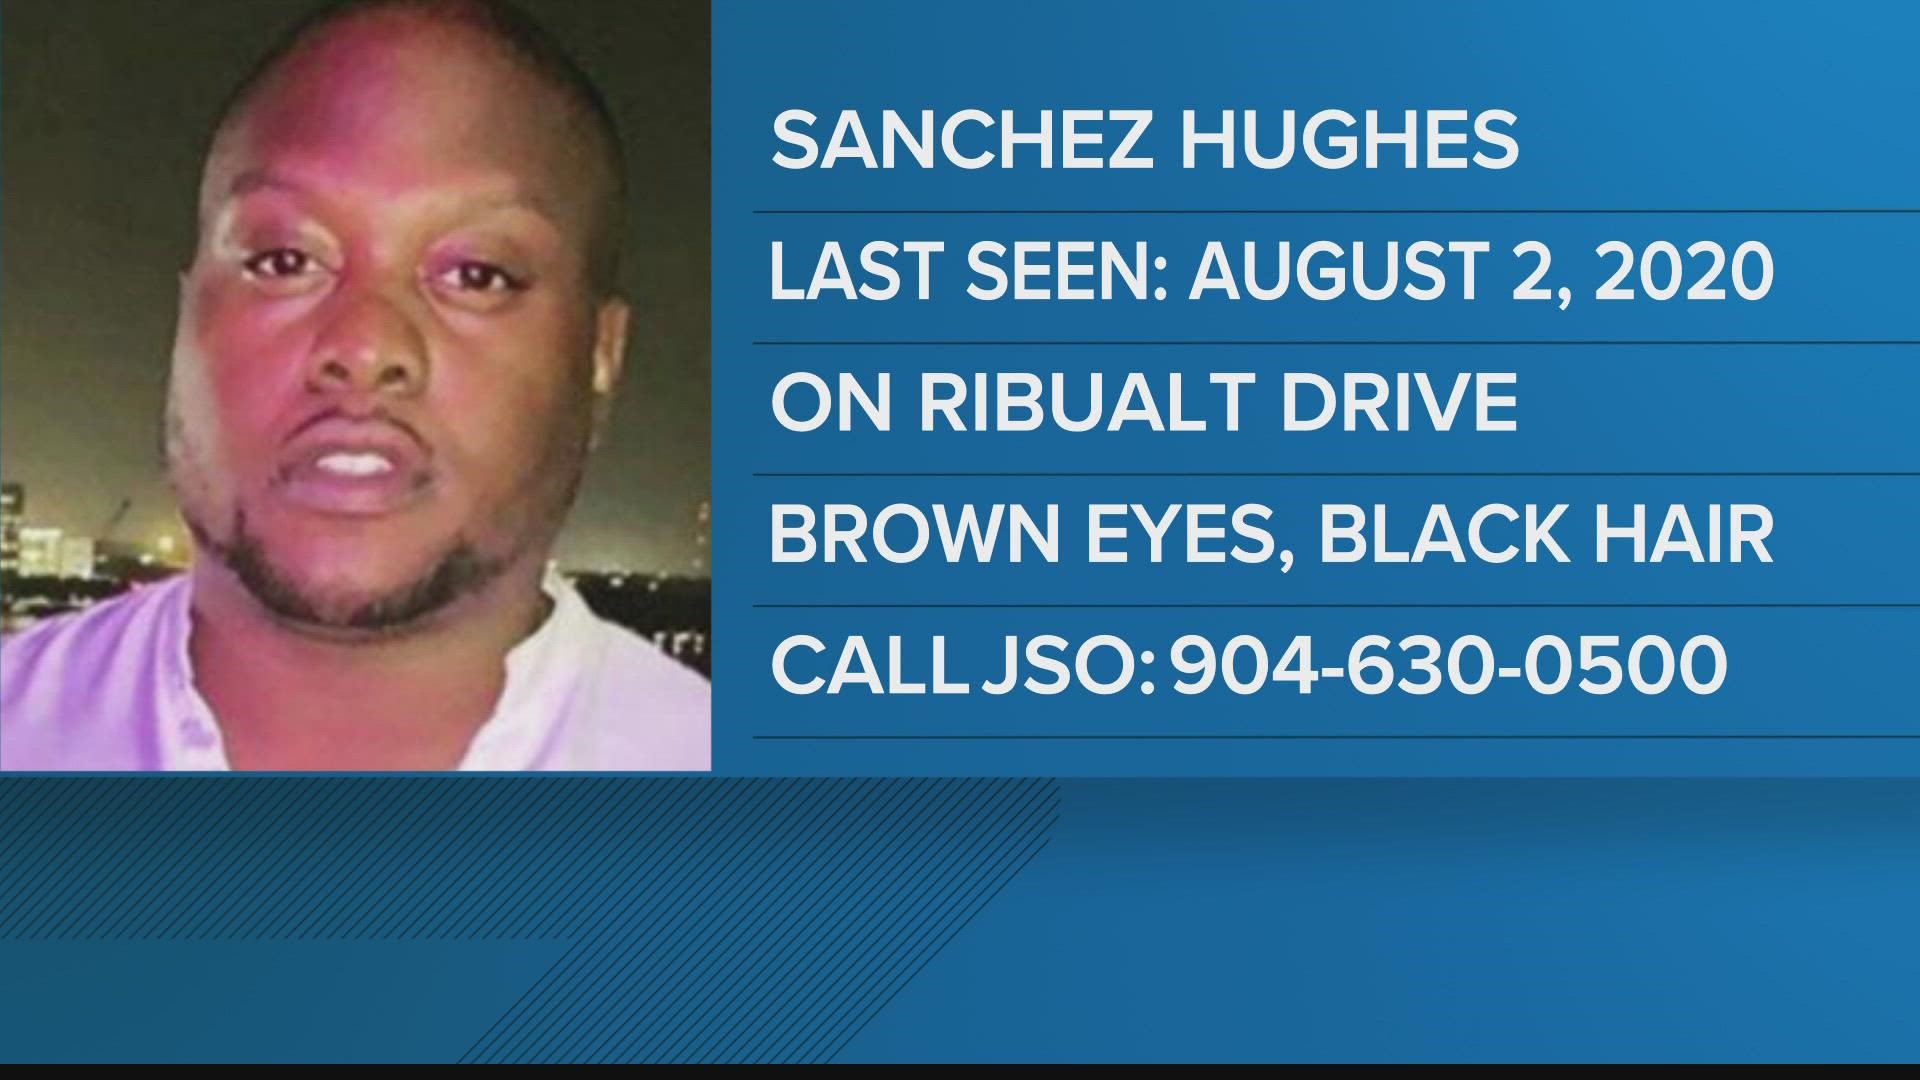 On Monday, Aug. 3, 2020 the Jacksonville Sheriff’s Office responded to the 1200 block of Ribault Drive in reference to a missing adult.